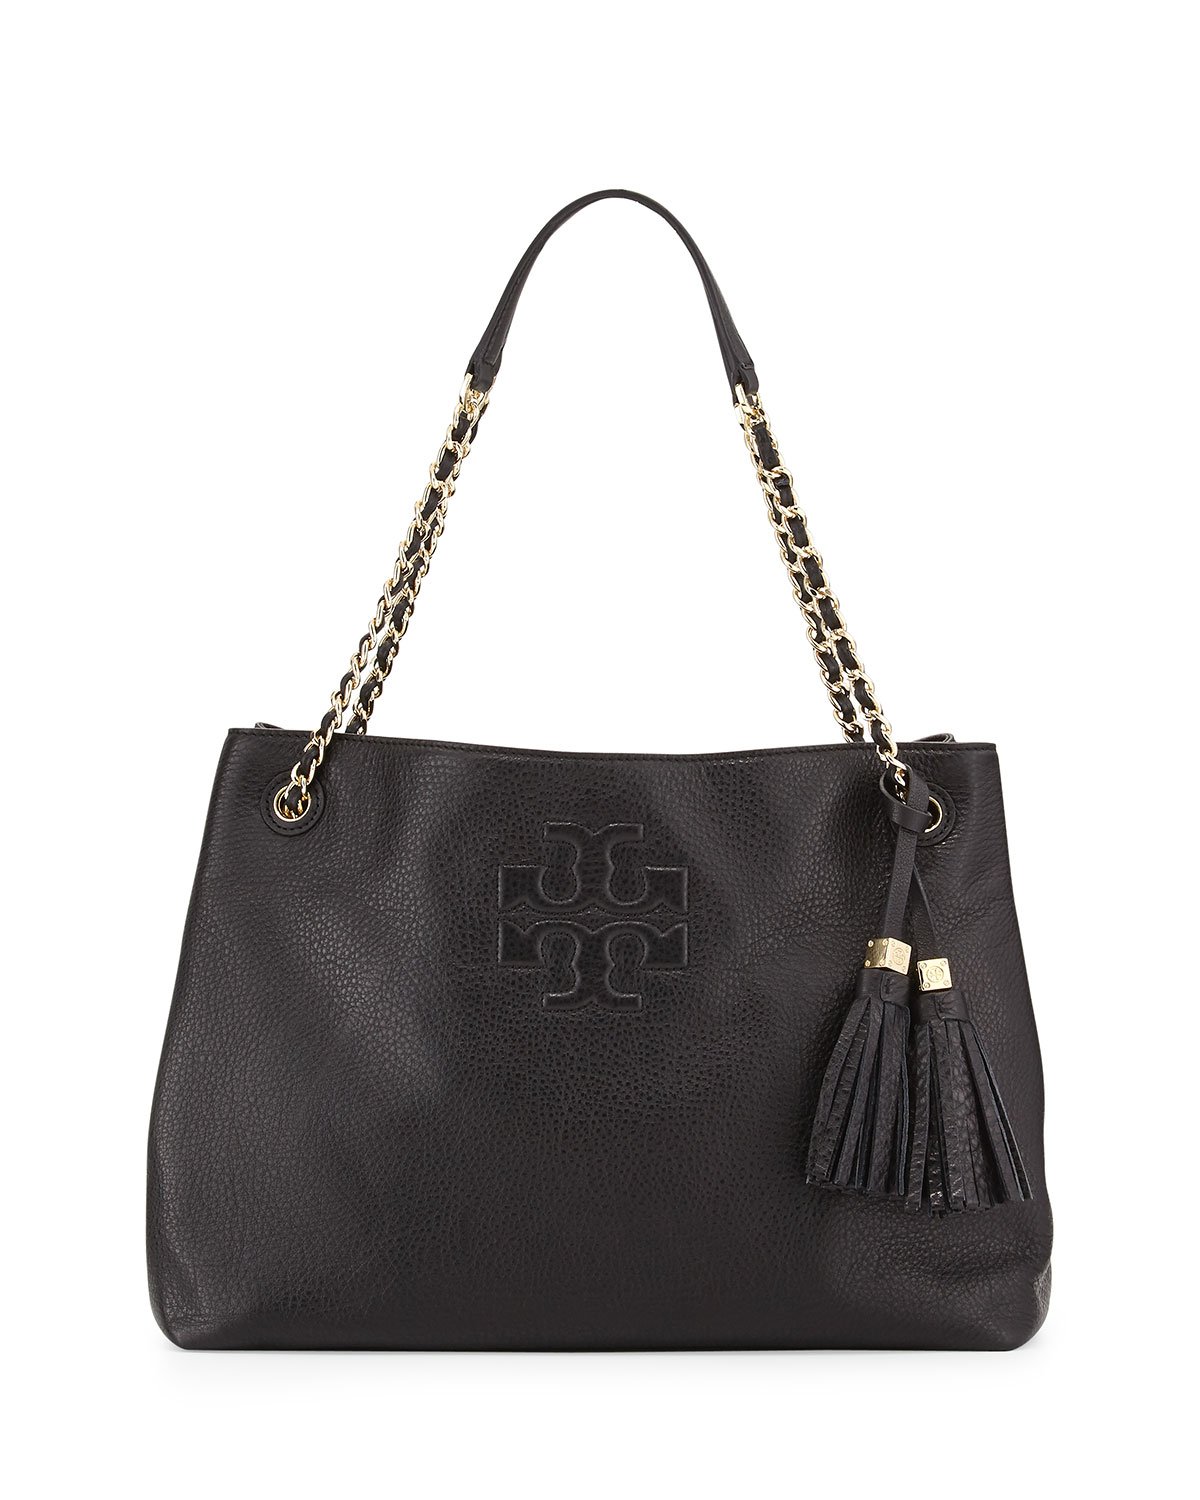 Tory Burch | Black Thea Large Chain Tote Bag | Lyst